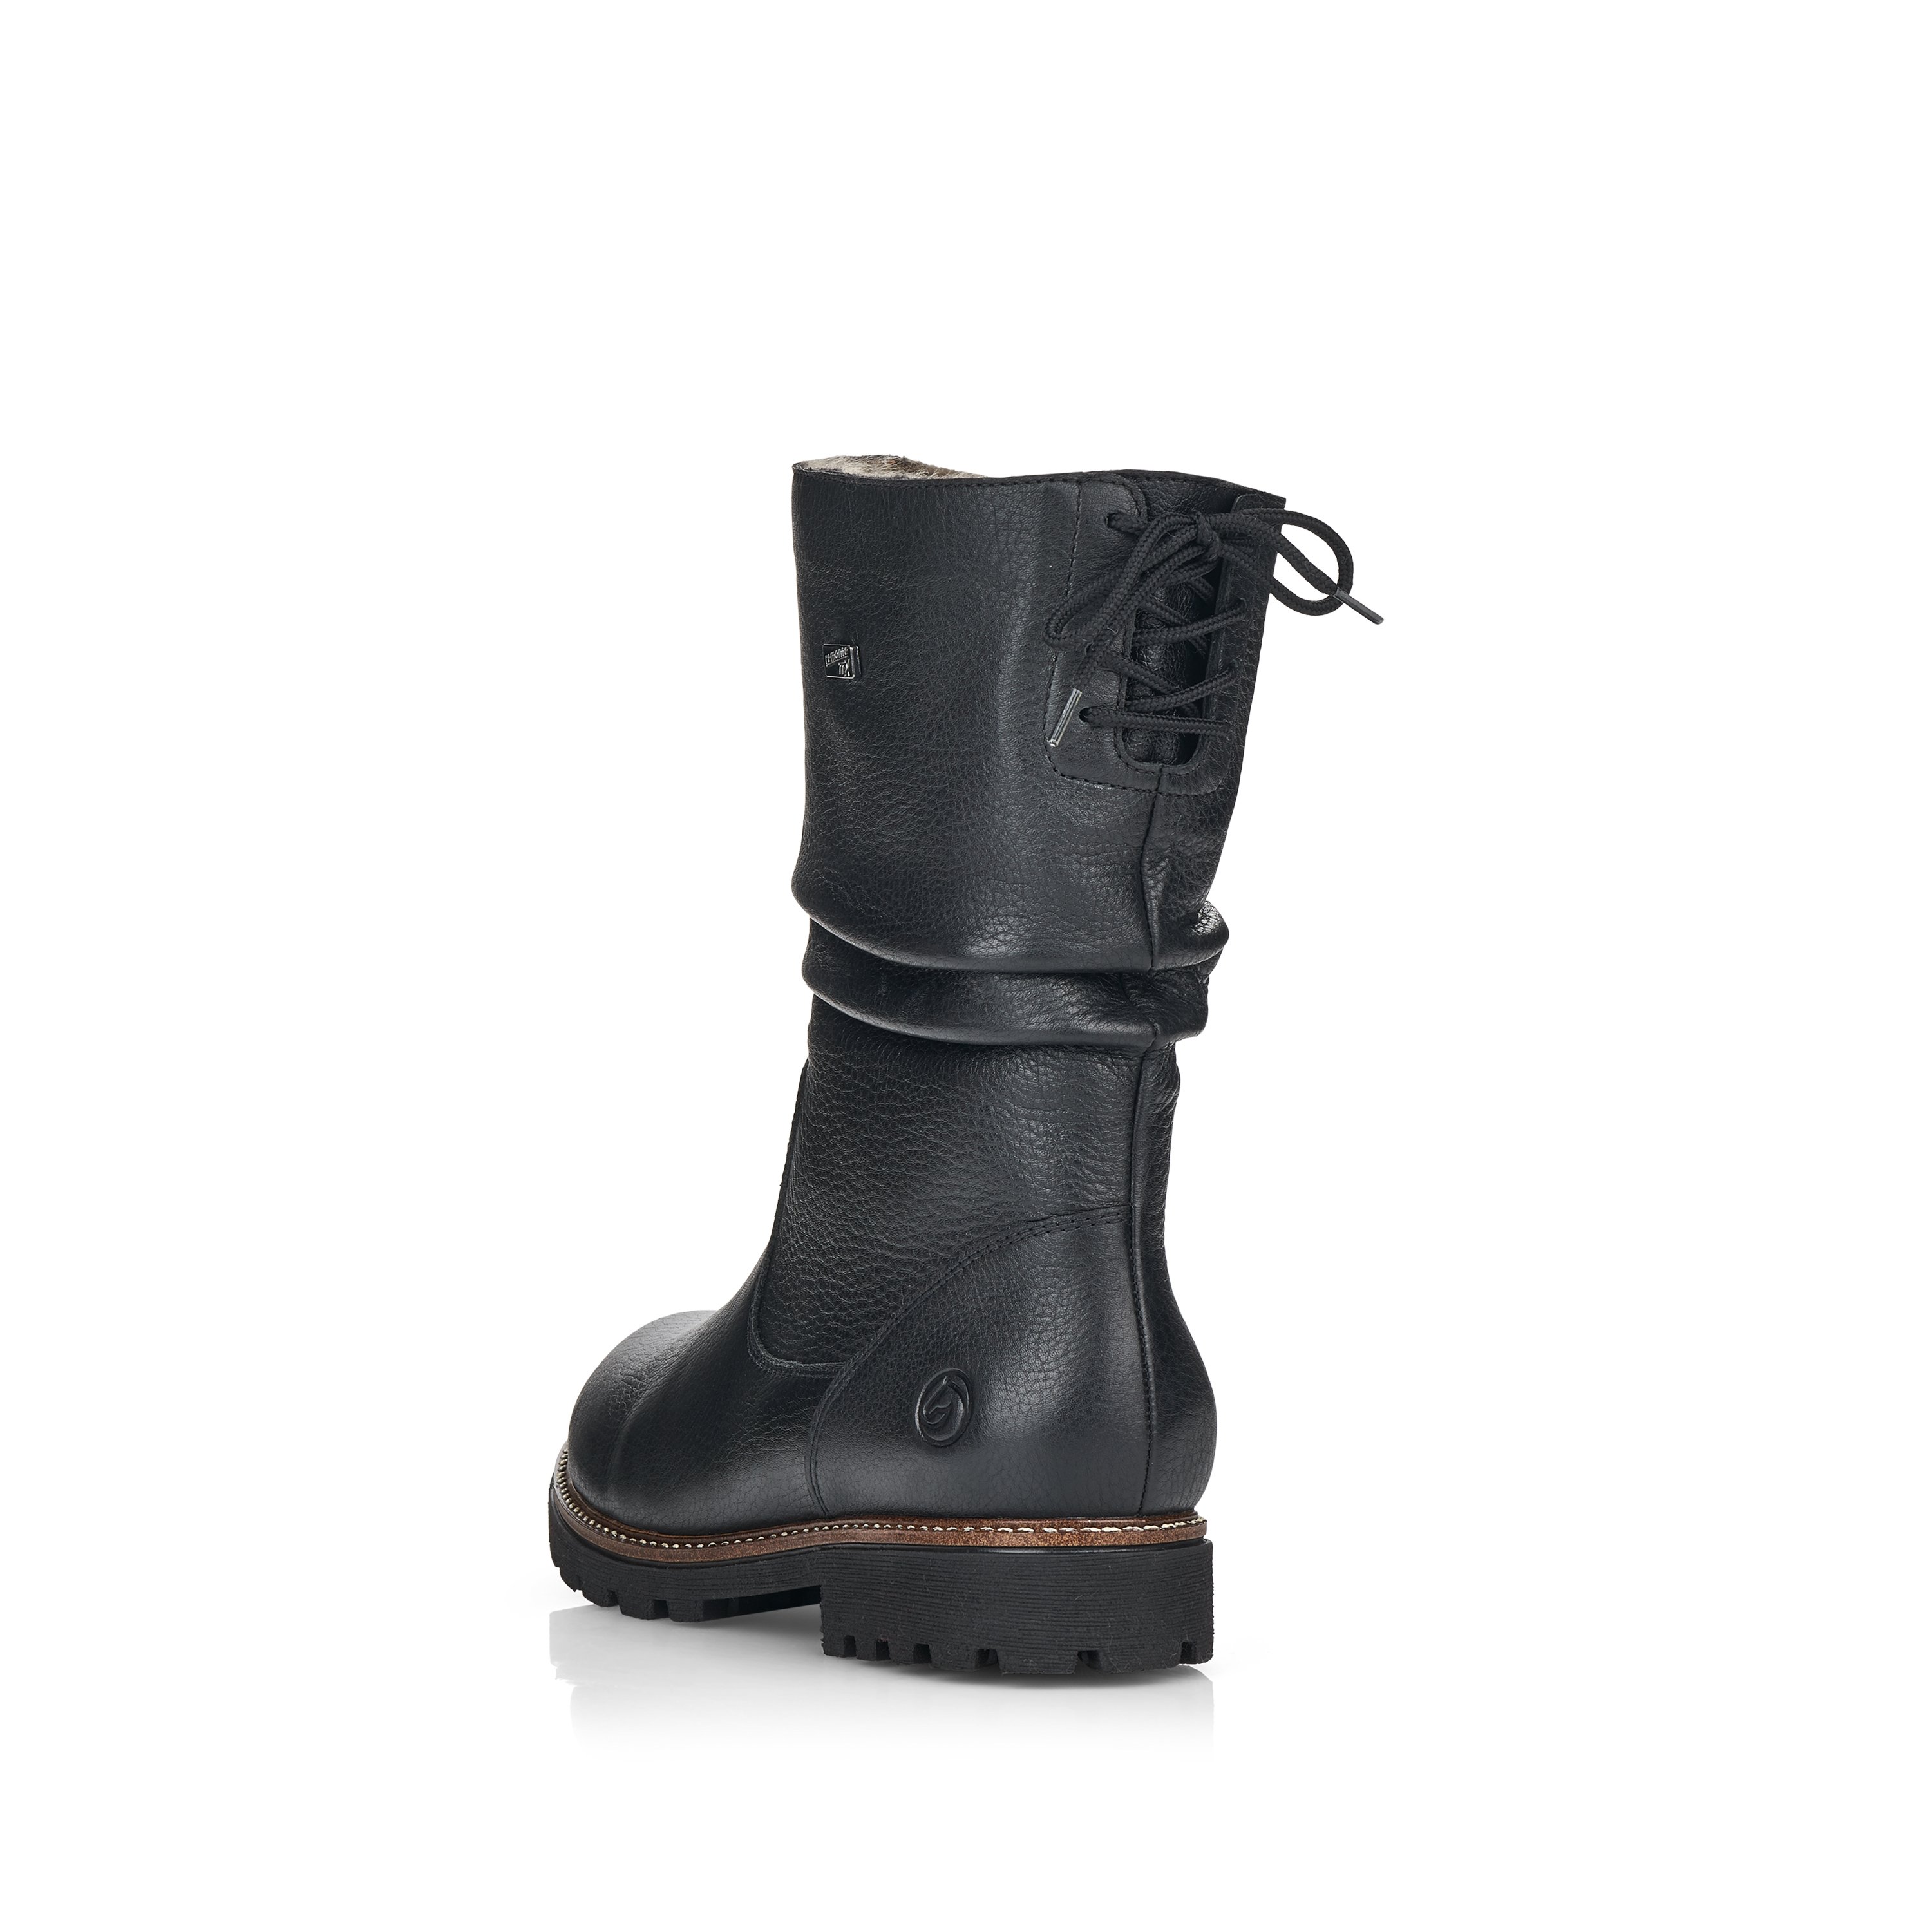 Black remonte women´s ankle boots D8477-01 with zipper as well as profile sole. Shoe from the back